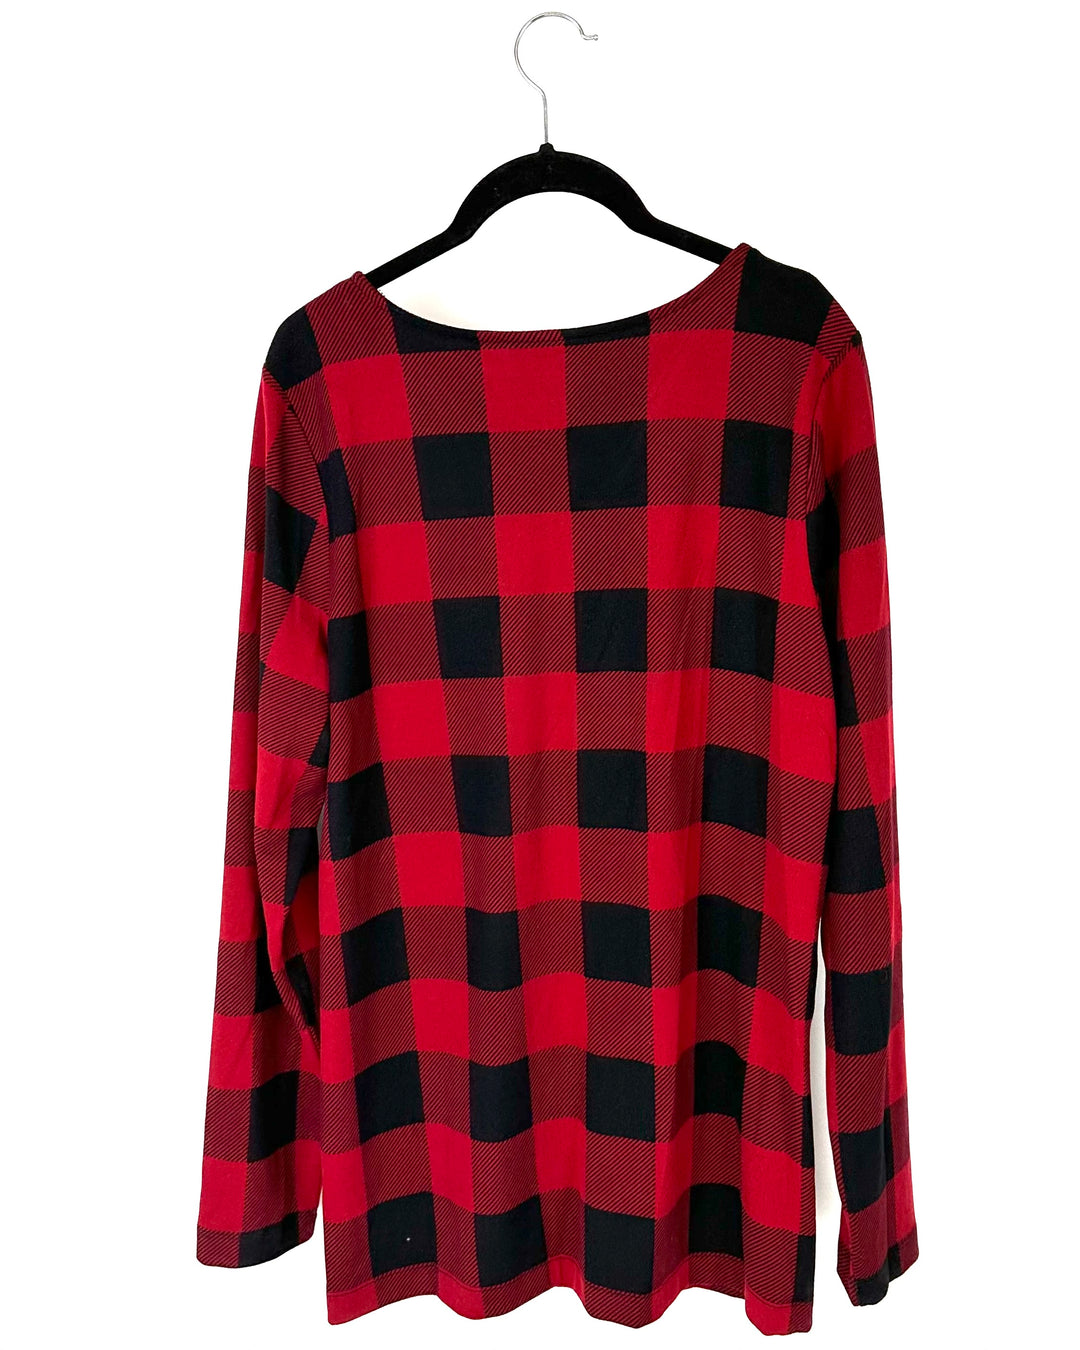 Black And Red Plaid Long Sleeve Top - Size 10-12